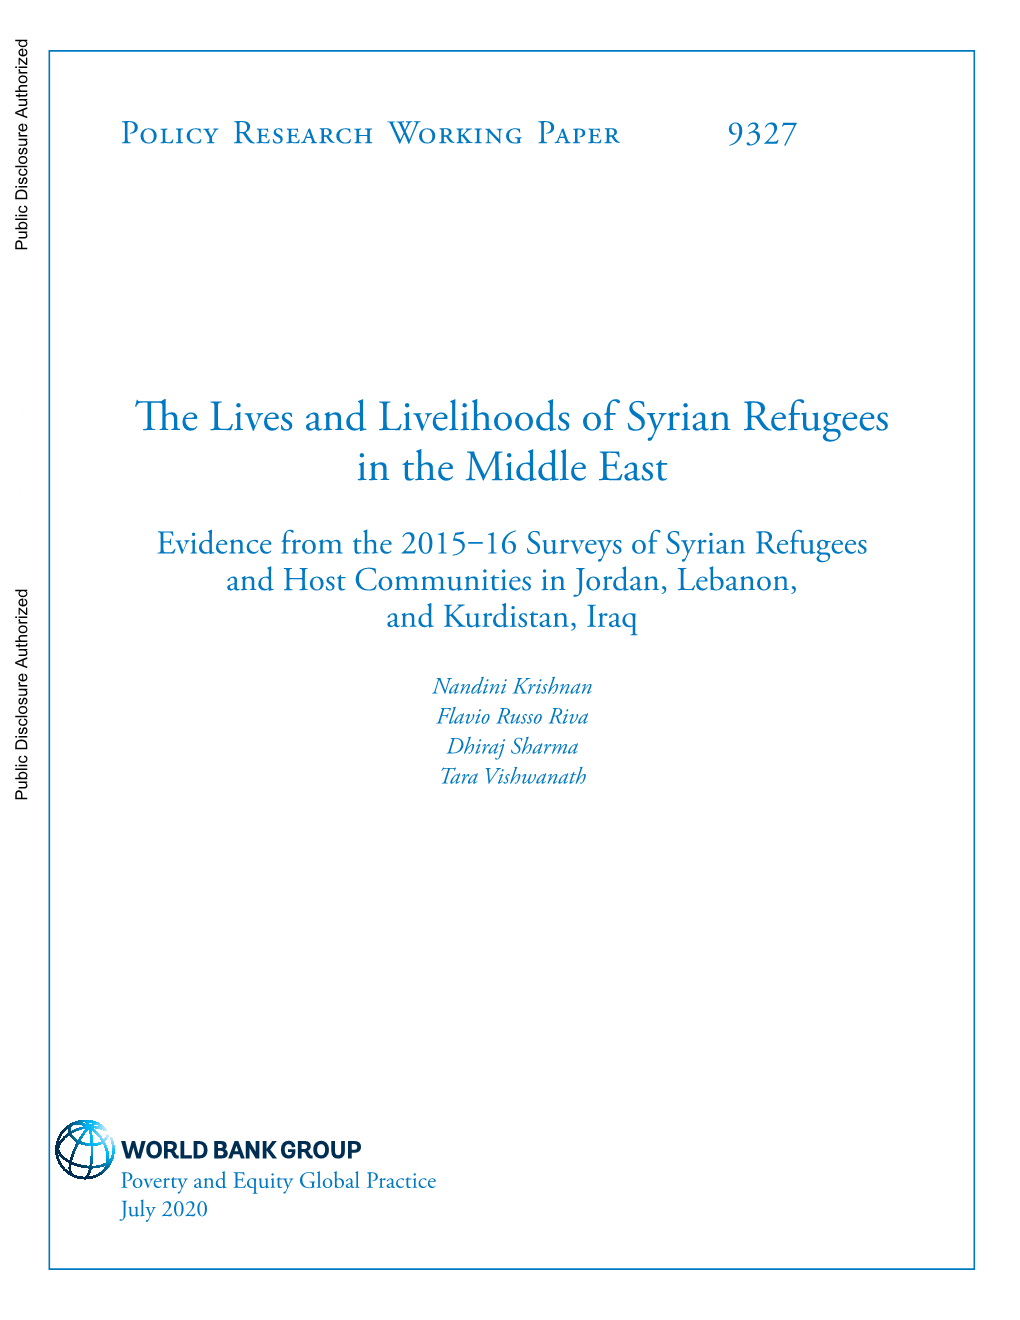 The Lives and Livelihoods of Syrian Refugees in the Middle East